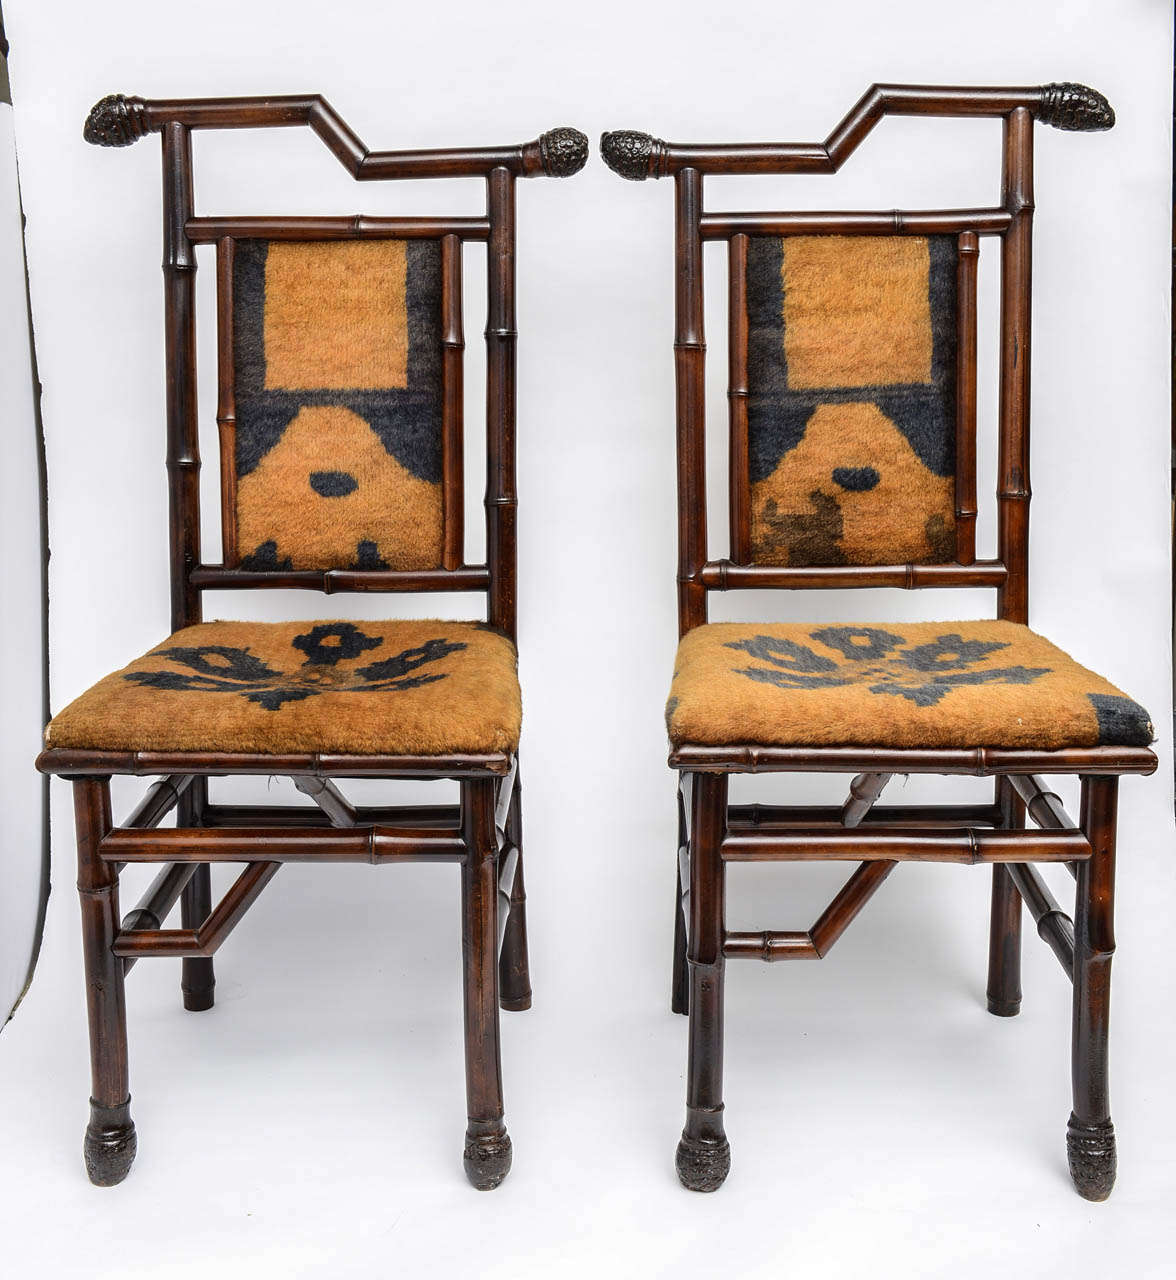 A unique chance to own both a part of English and American History. A very interesting pair of 19th Century English Bamboo chairs form the Palm Beach home of Lilly Pulitzer wonderful root details, as well as,  very original printed pattern fur